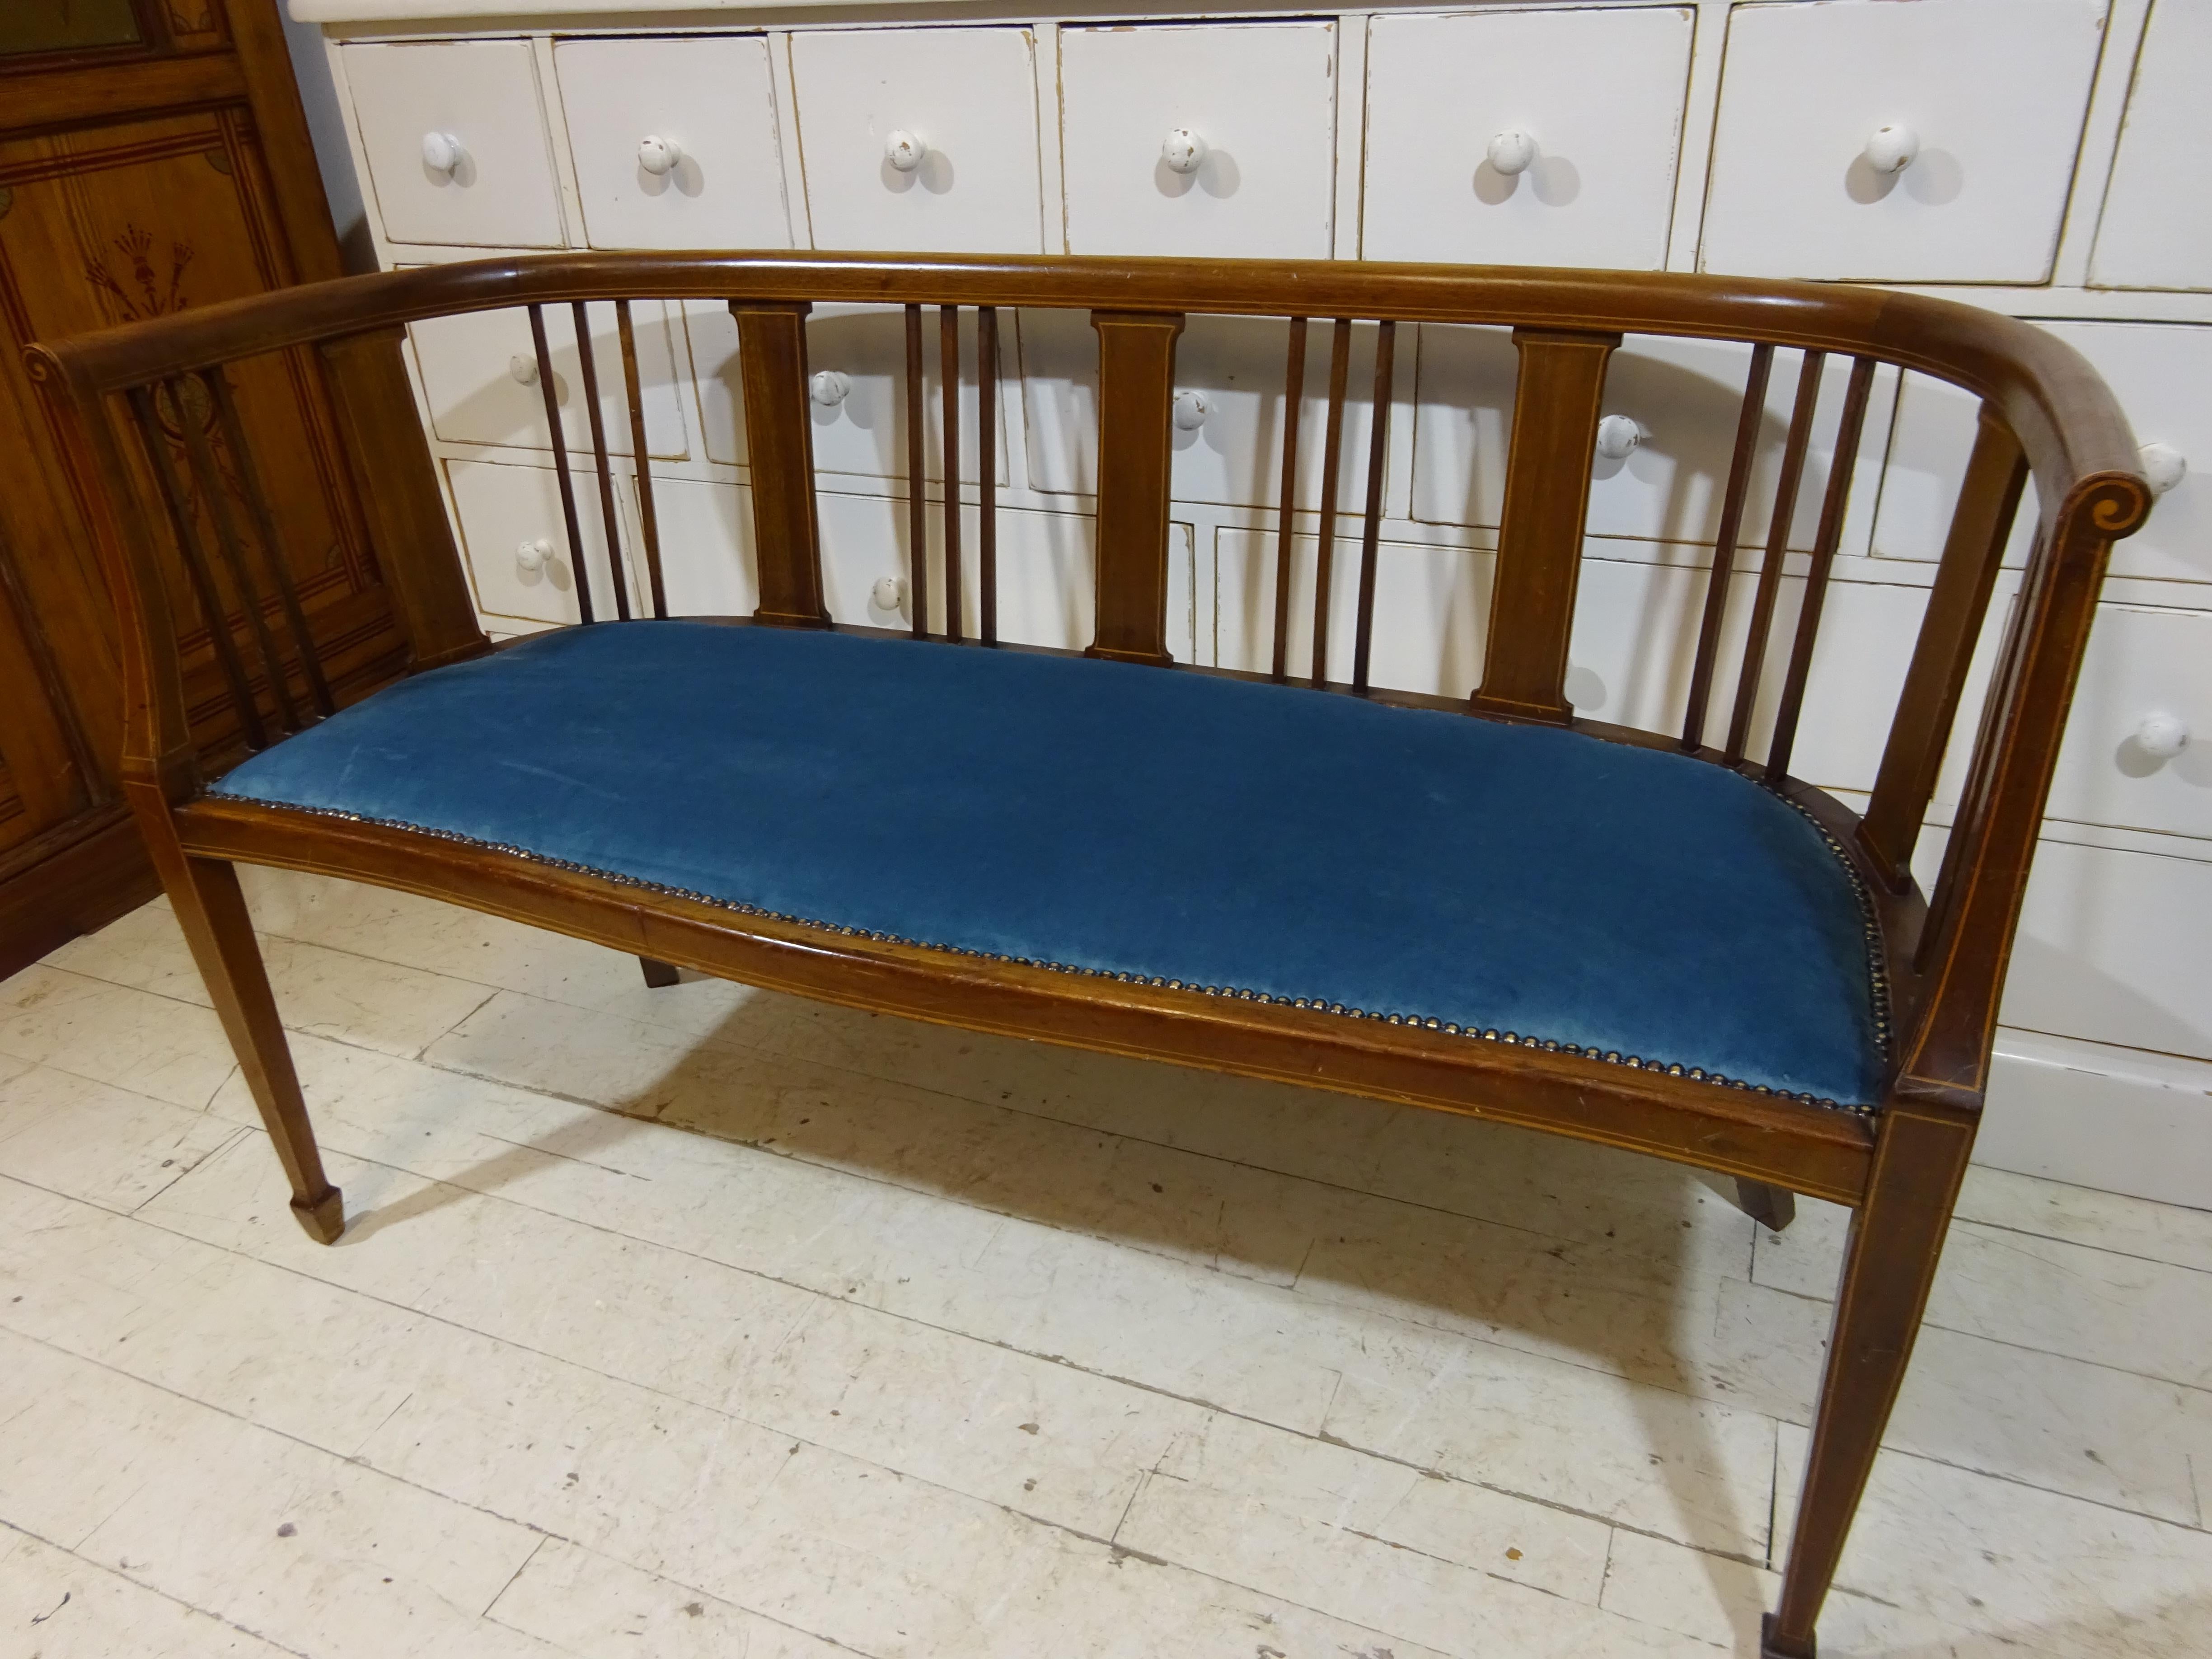 Antique Edwardian Window Seat 

This exquisite handmade Edwardian window chair or love seat is crafted from solid mahogany with inlaid fruitwood designs throughout and is sure to be a beautiful addition to any antique collection. It has been